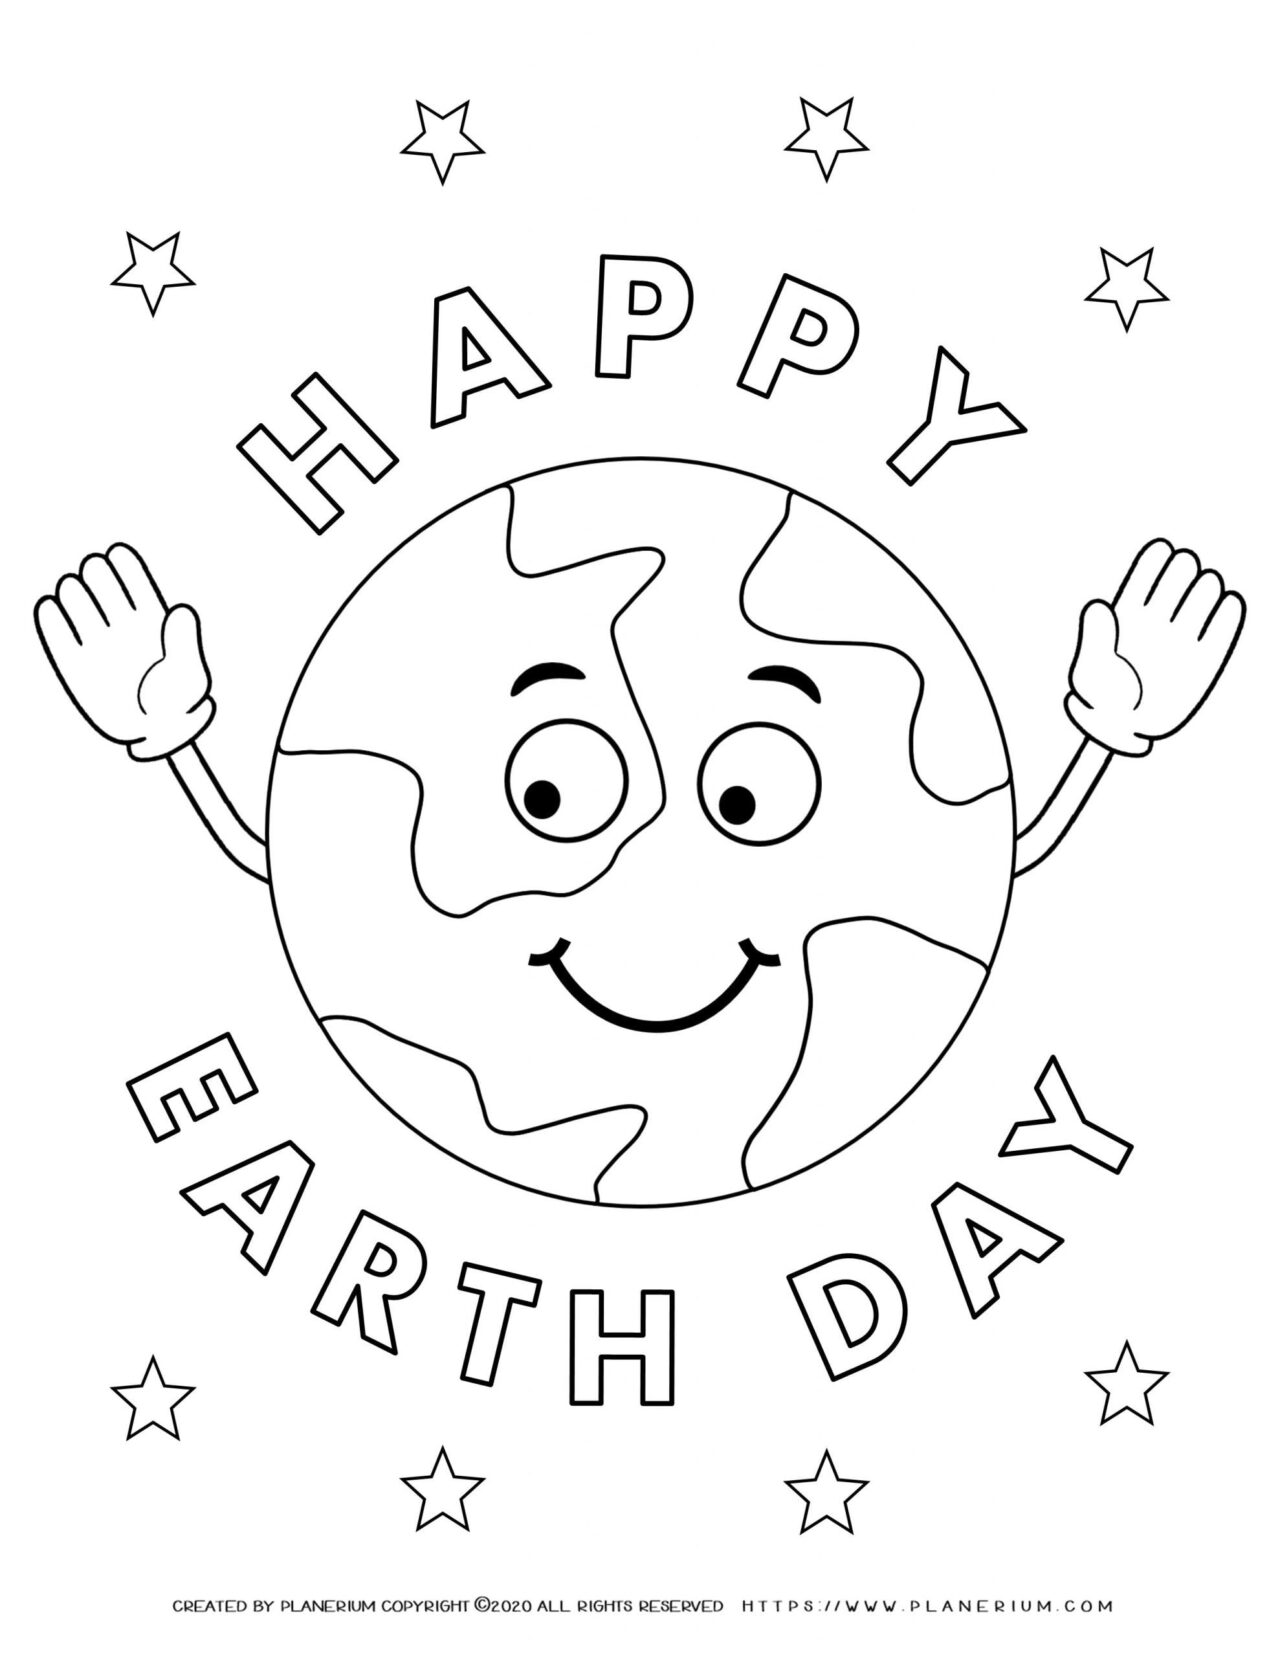 Earth Day Coloring Page: Free Printable Happy Earth Day Coloring Page